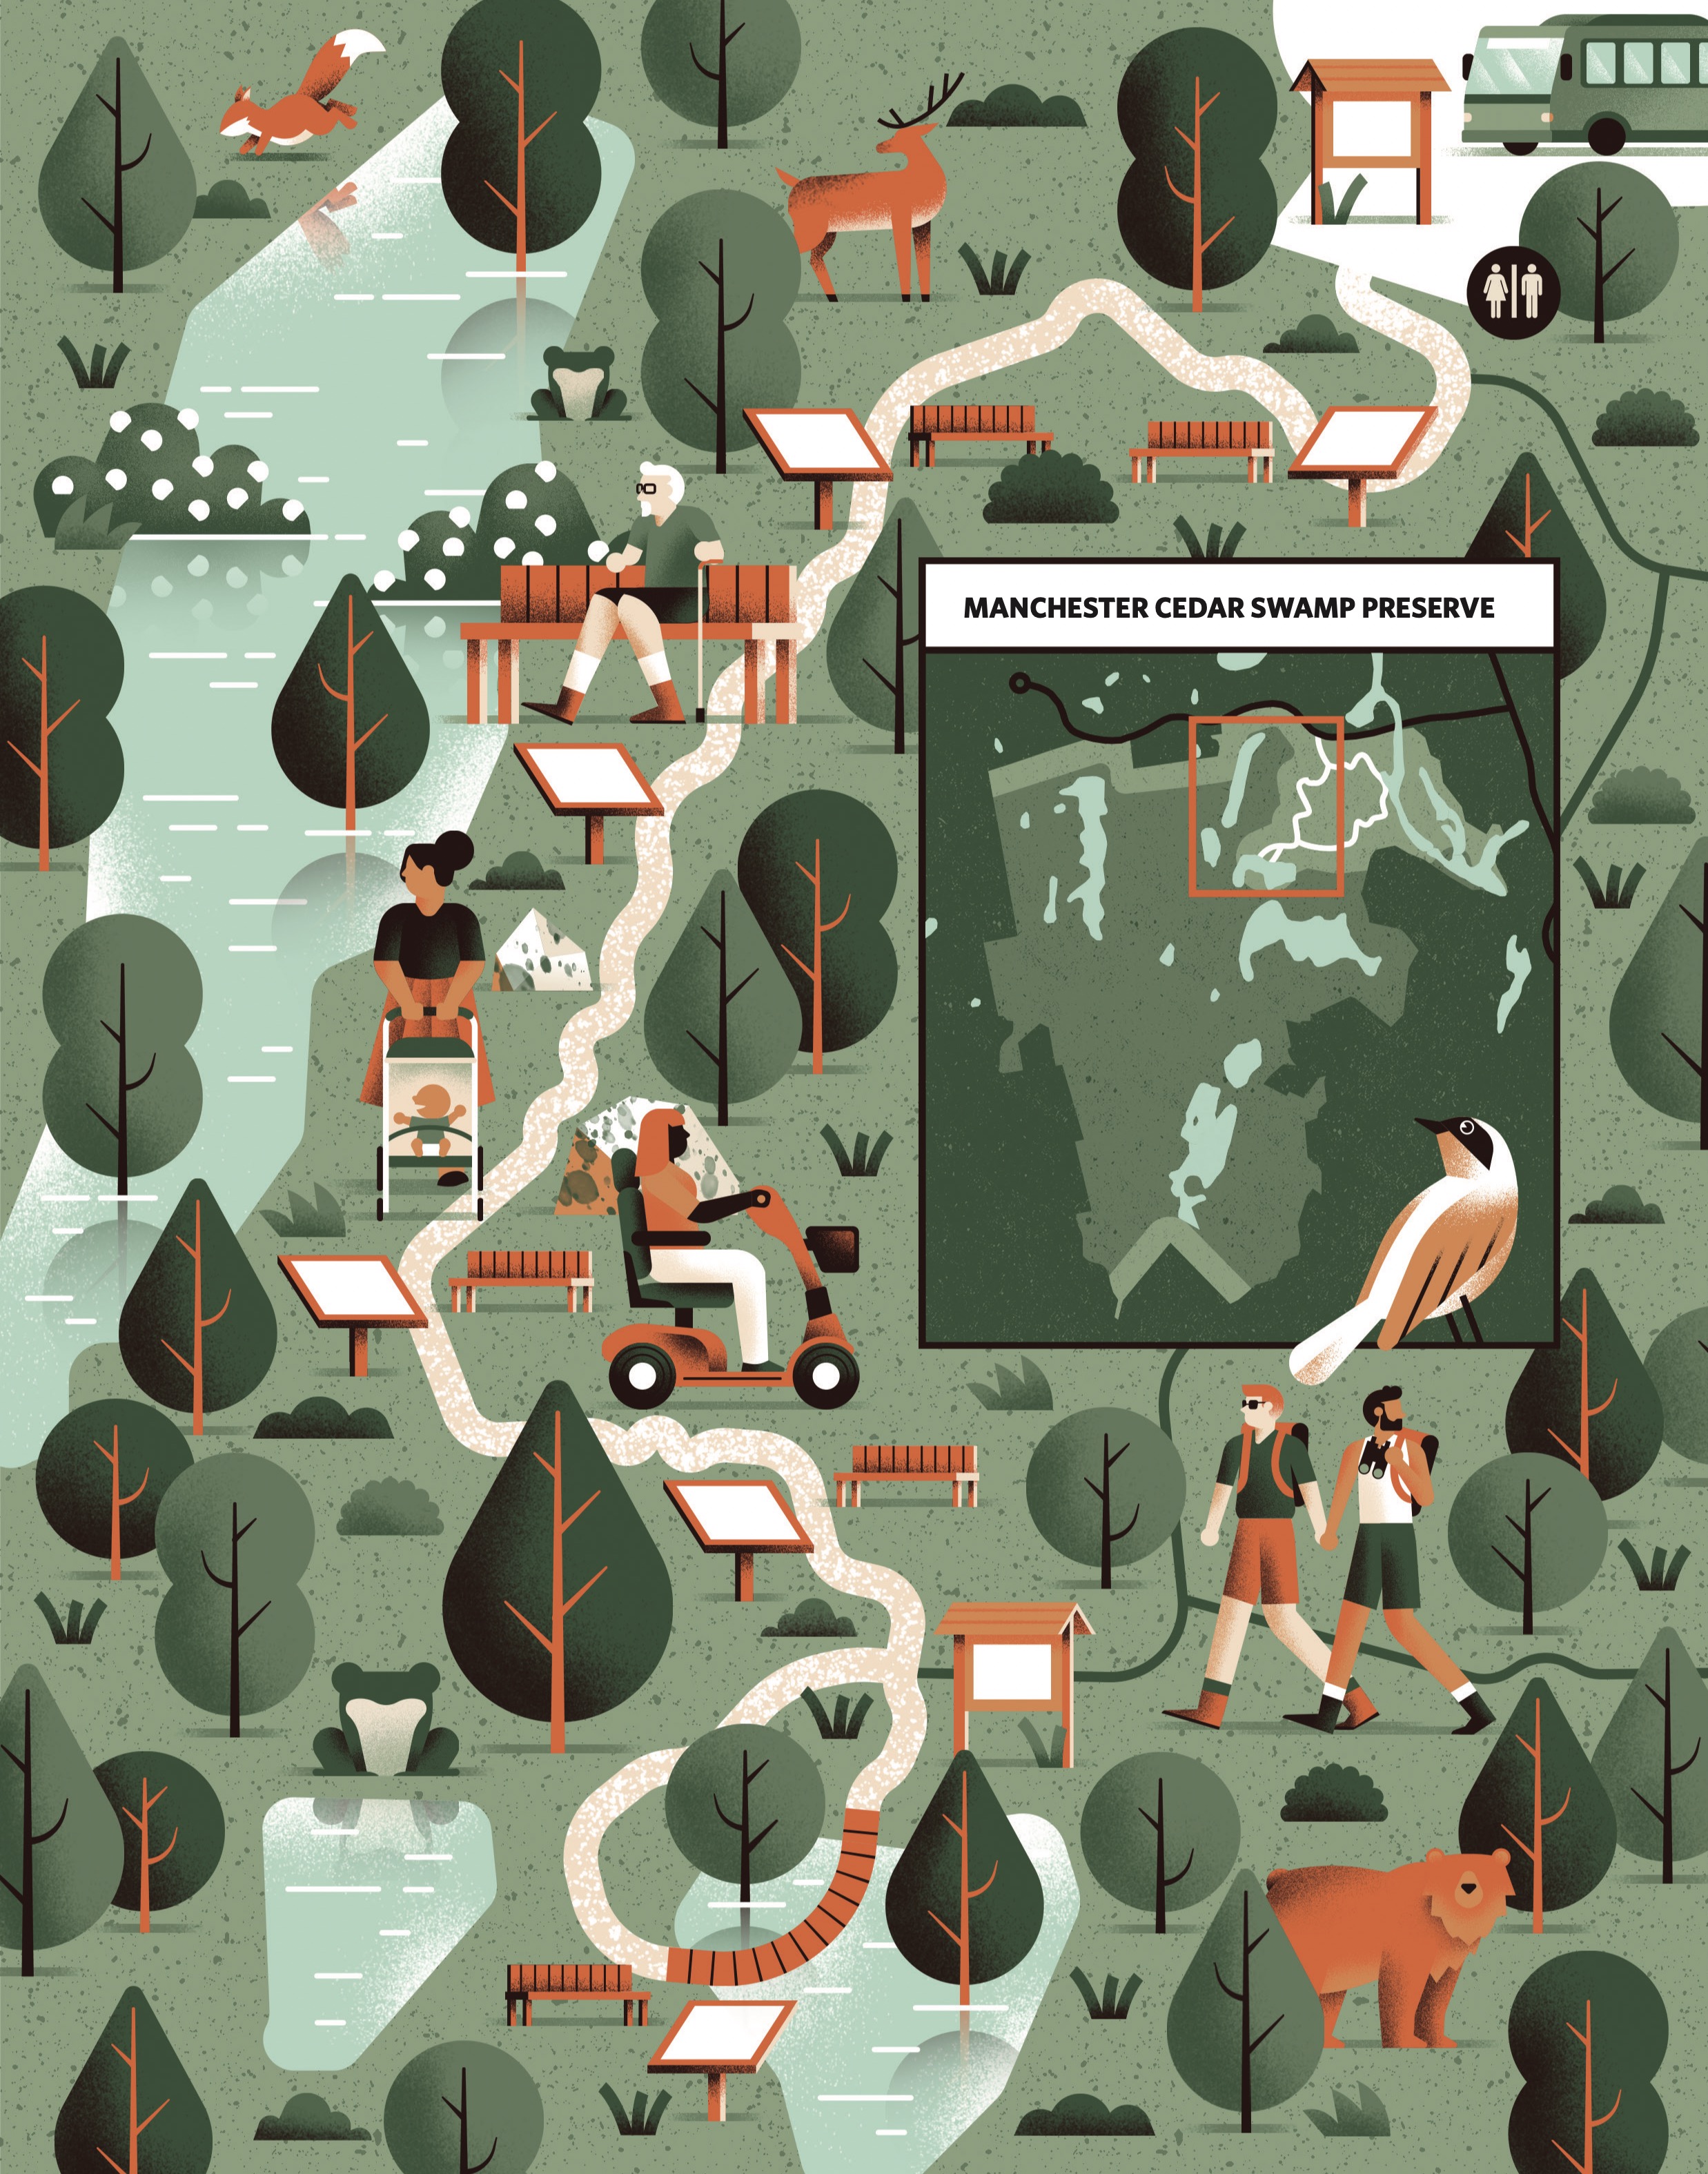 An illustrated map of Manchester Cedar Swamp Preserve.